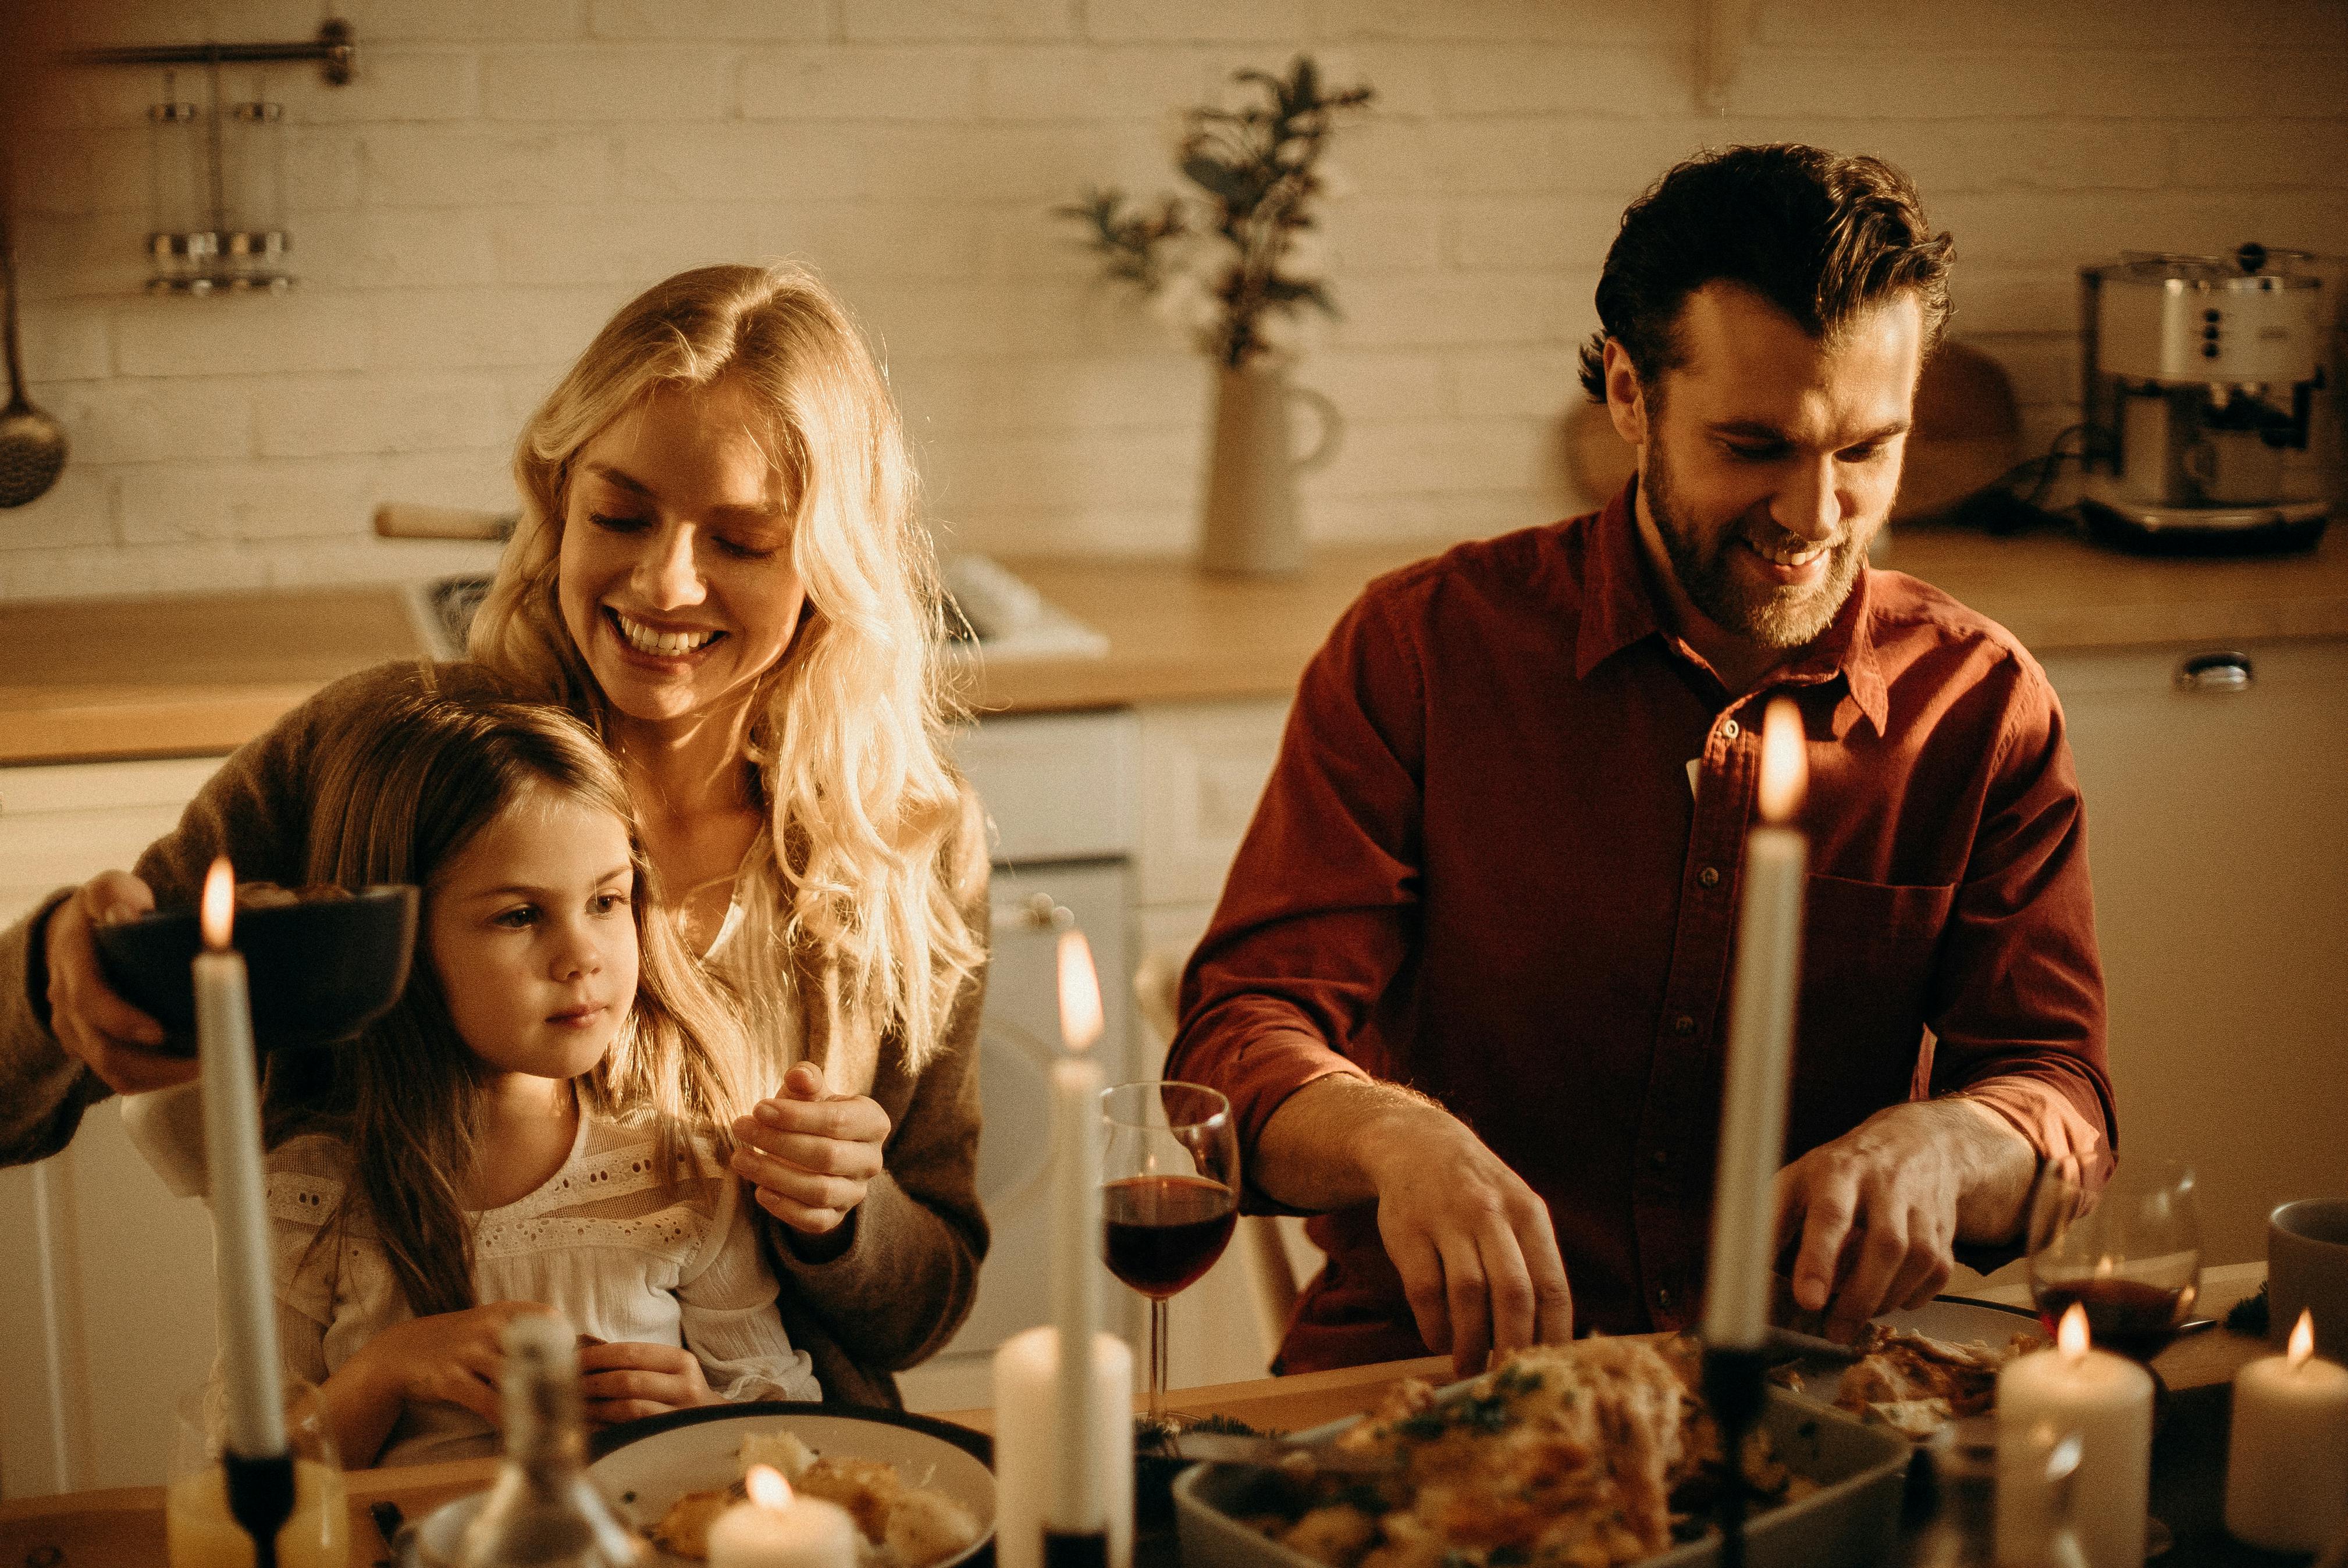 A happy family having dinner | Source: Pexels